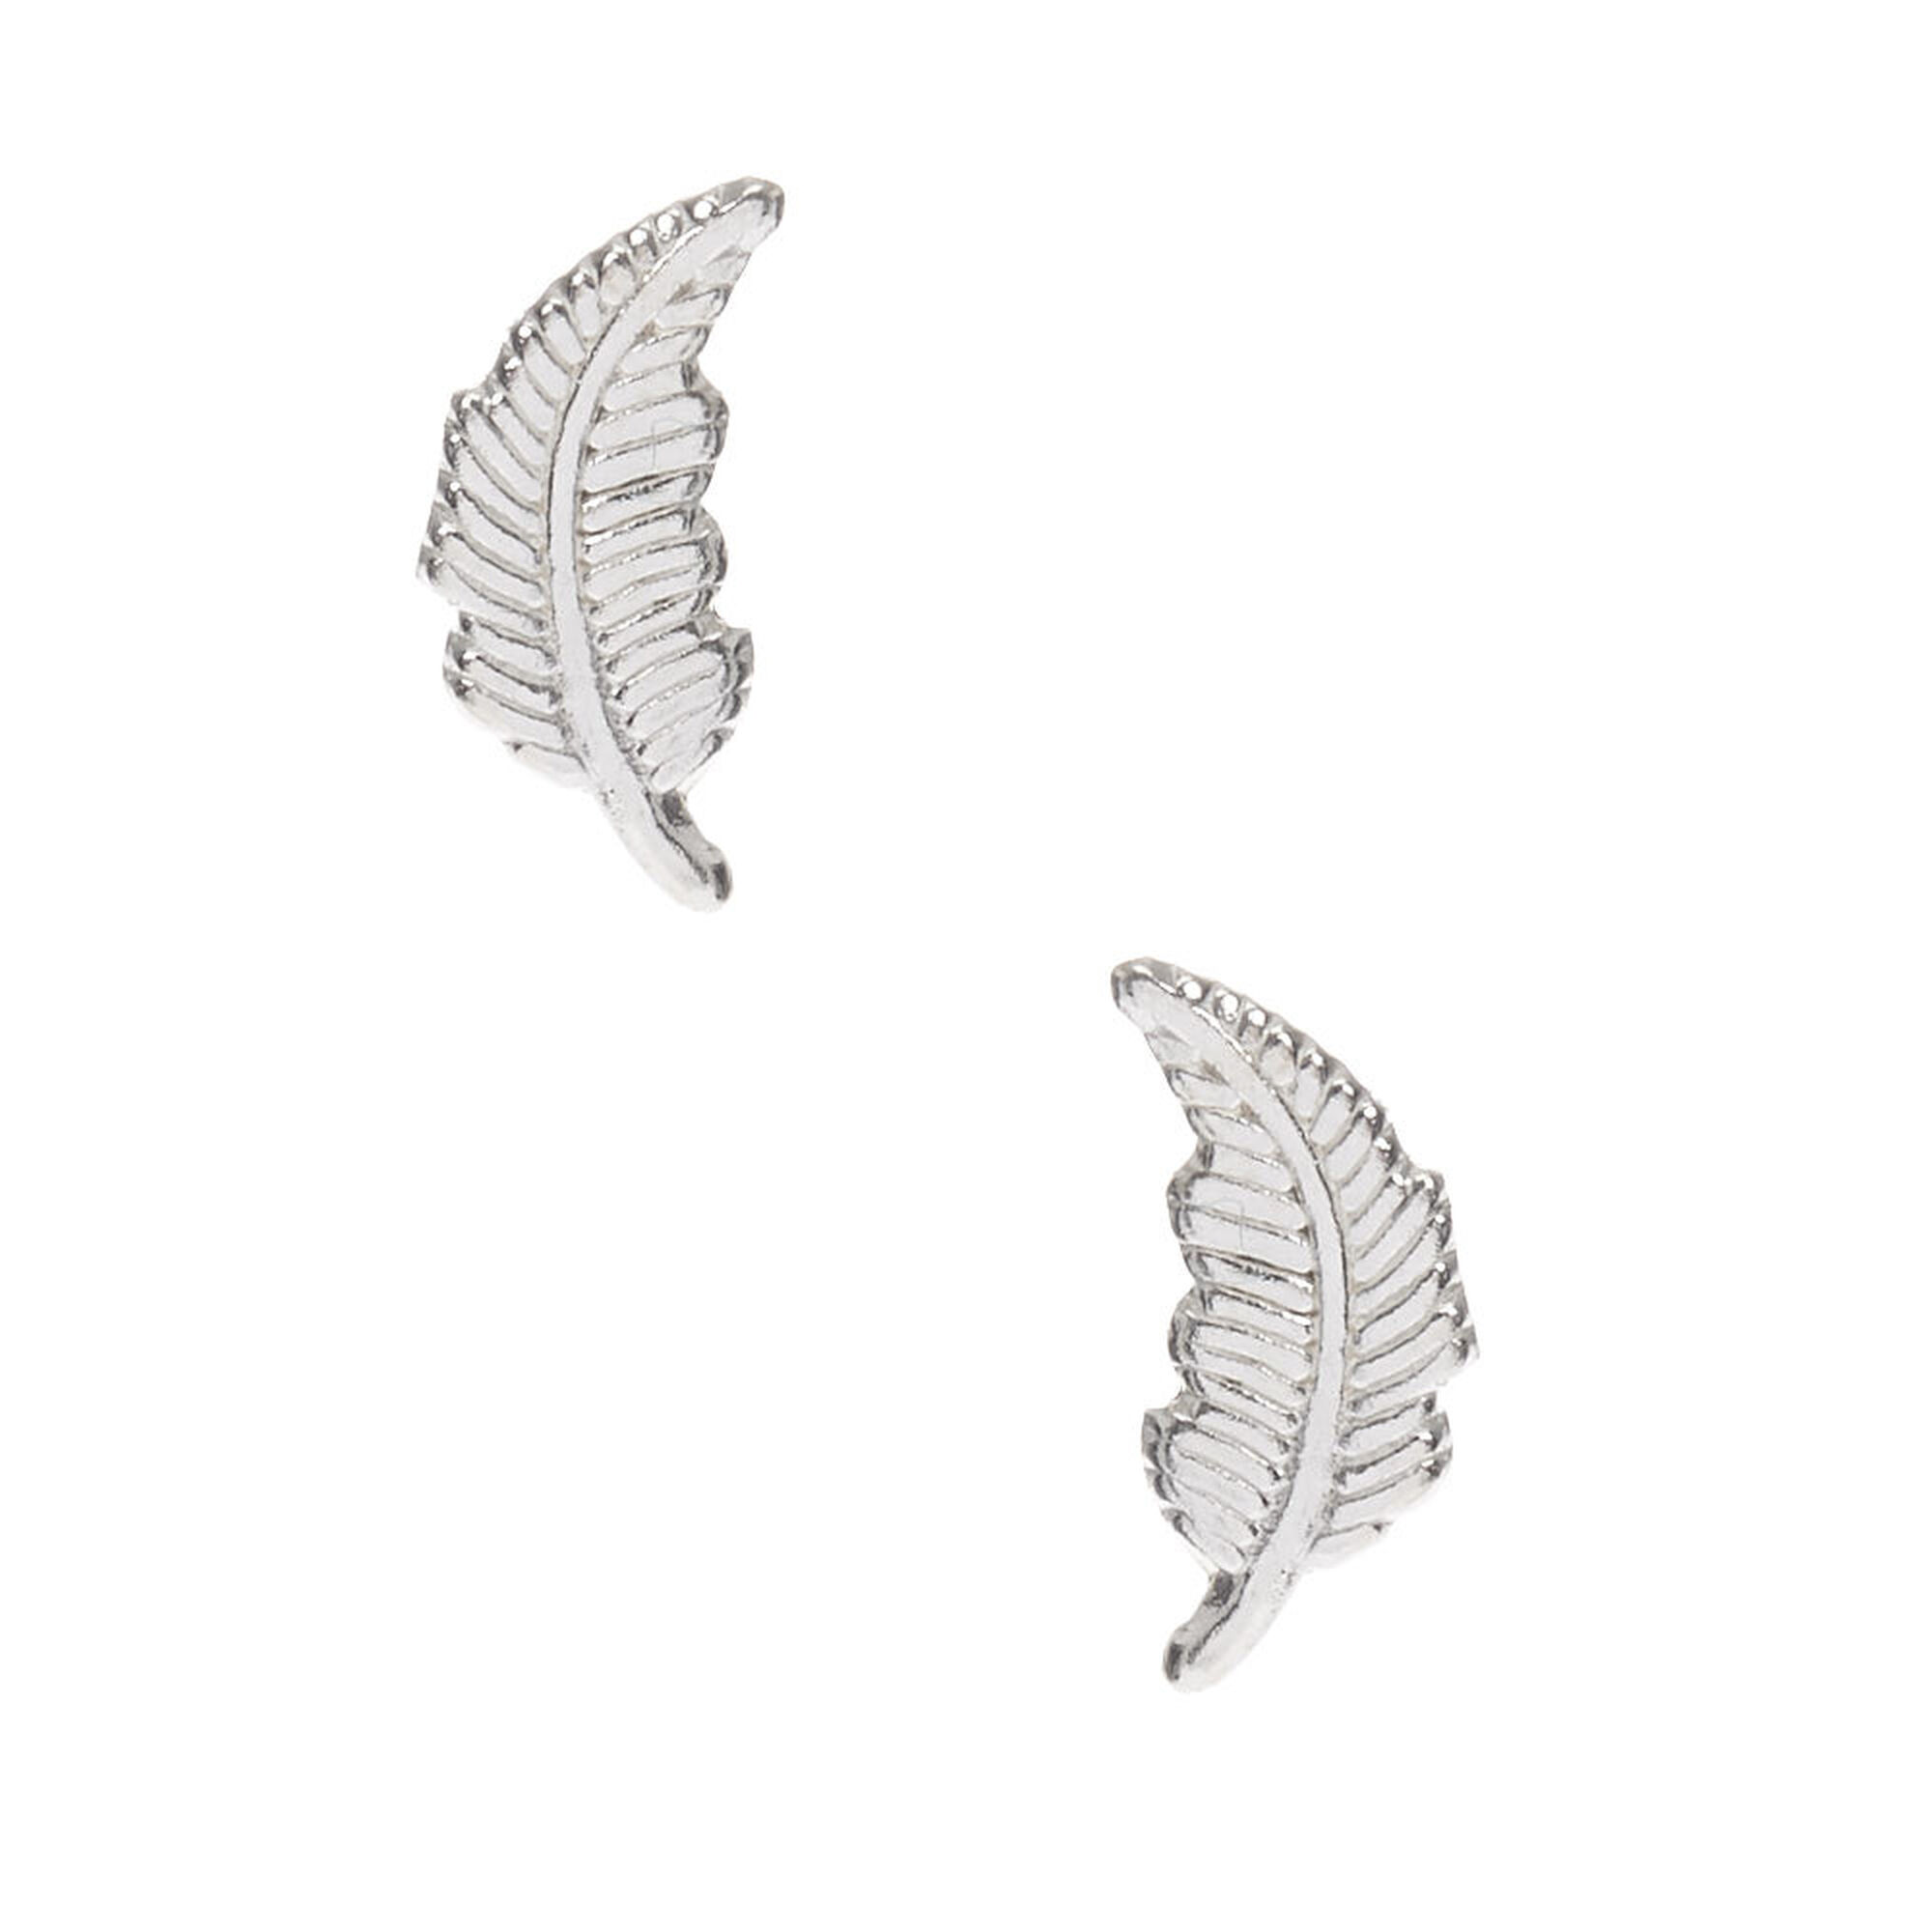 View Claires Leaf Stud Earrings Silver information